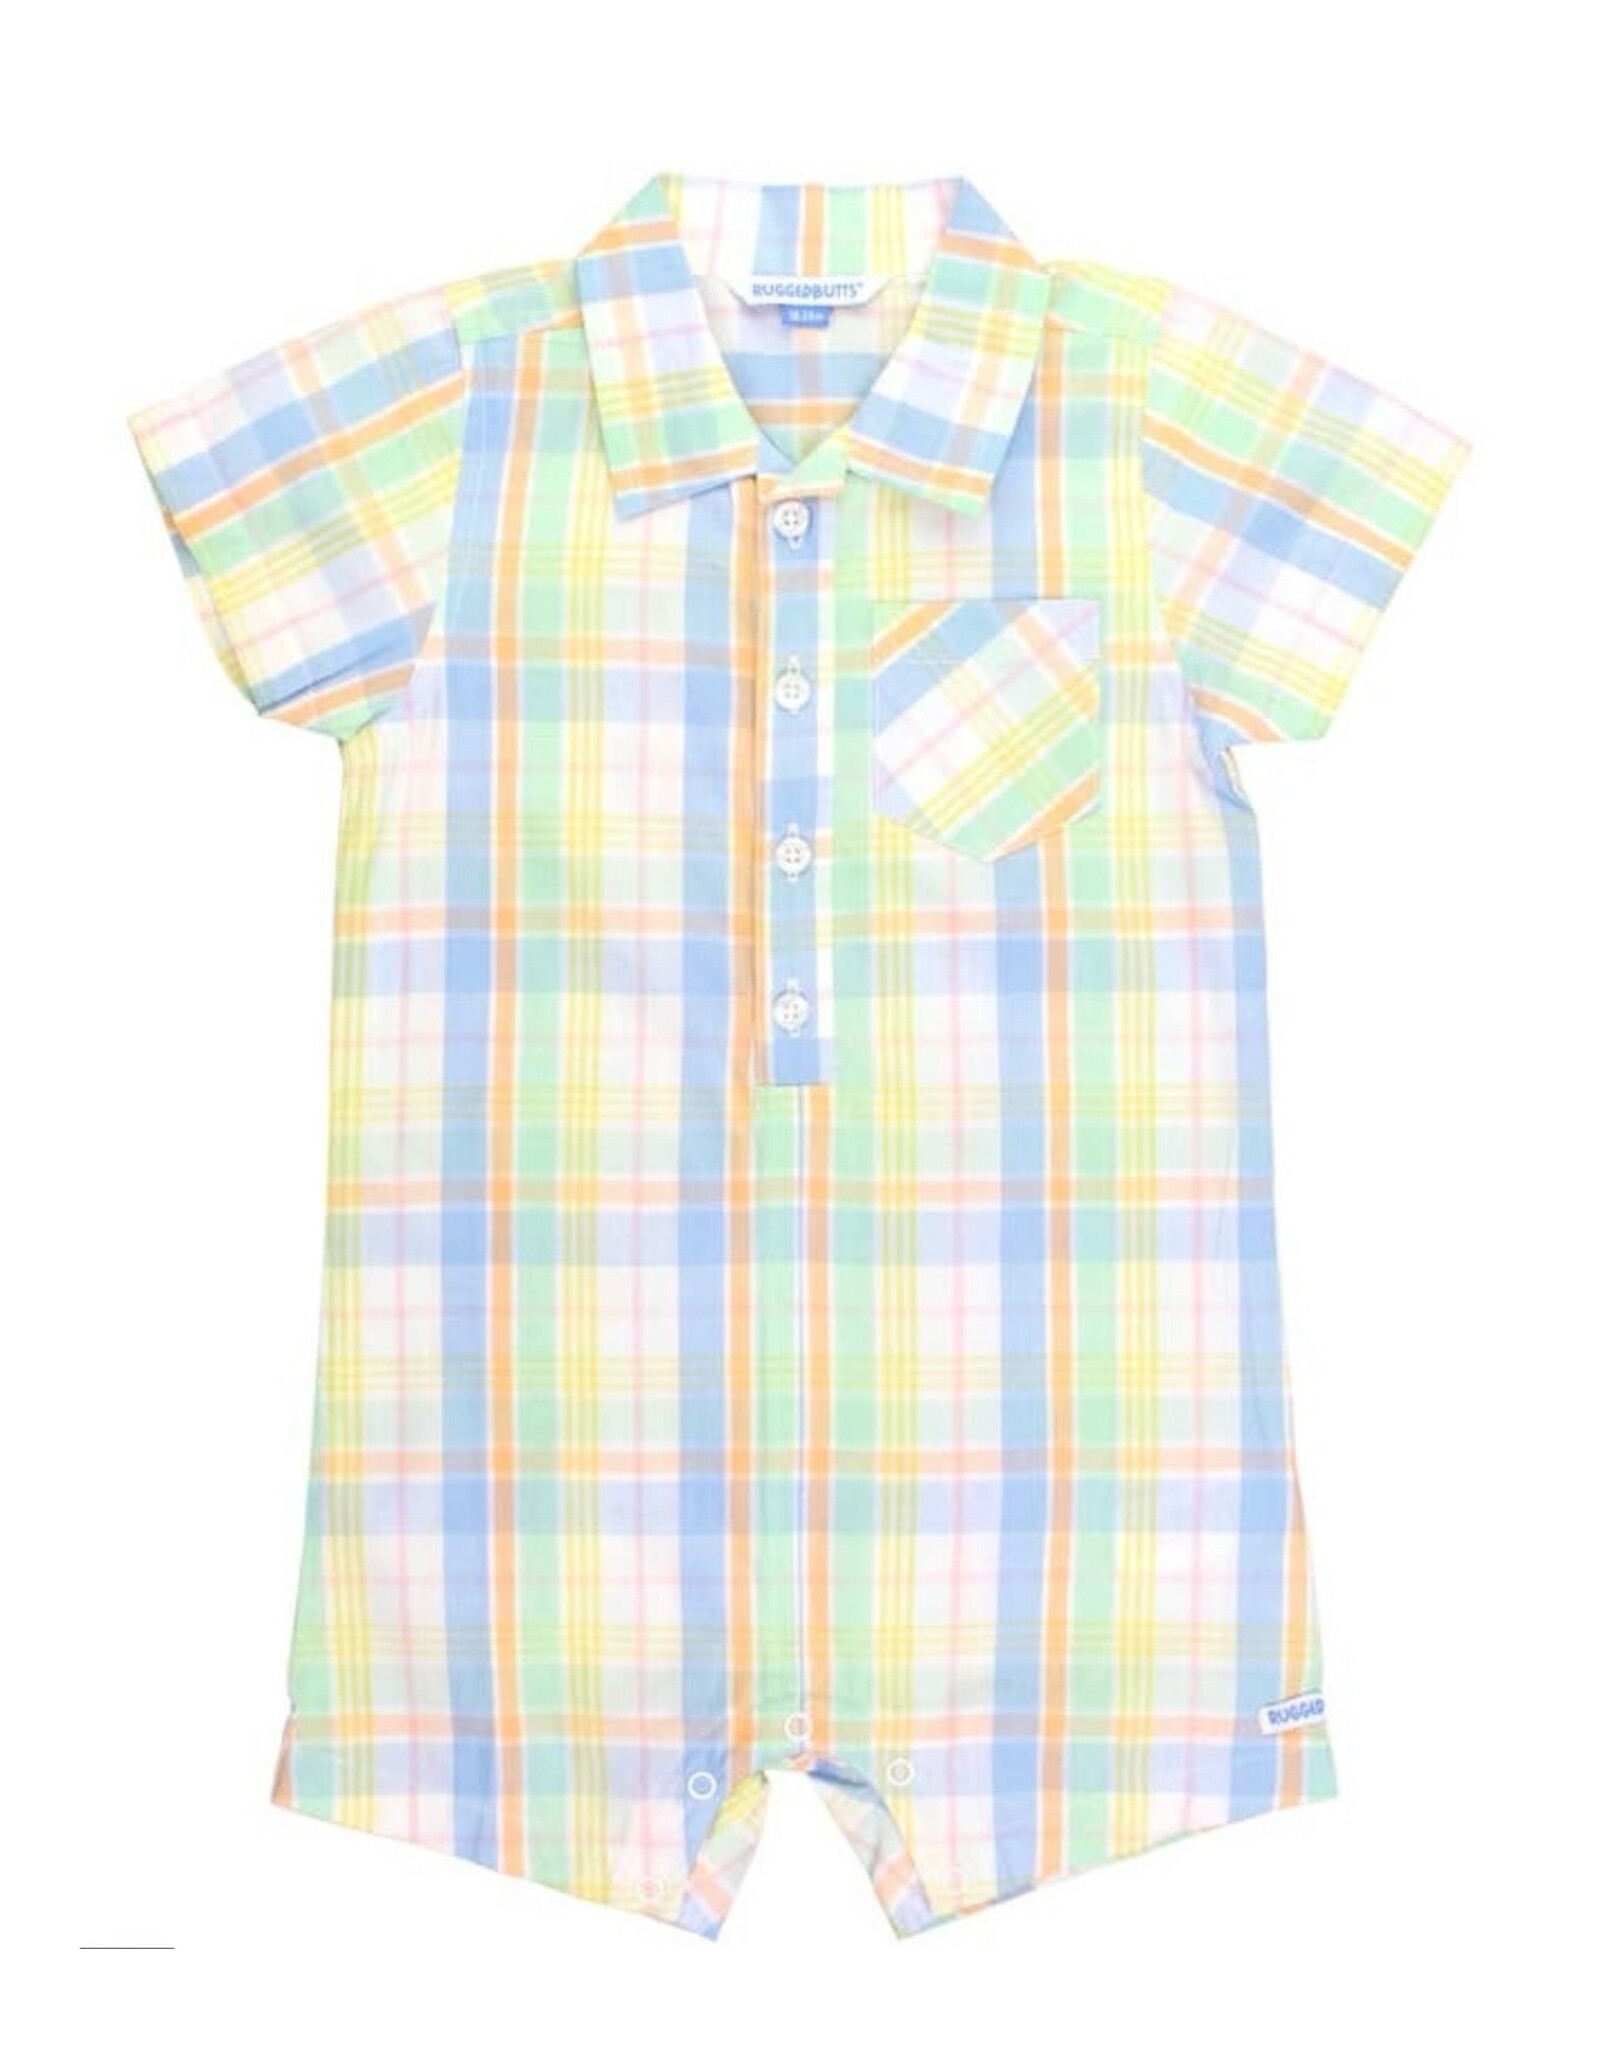 Ruffle Butts Ruffle Butts- Clubhouse Rainbow Plaid S/S Woven Button-Up Romper